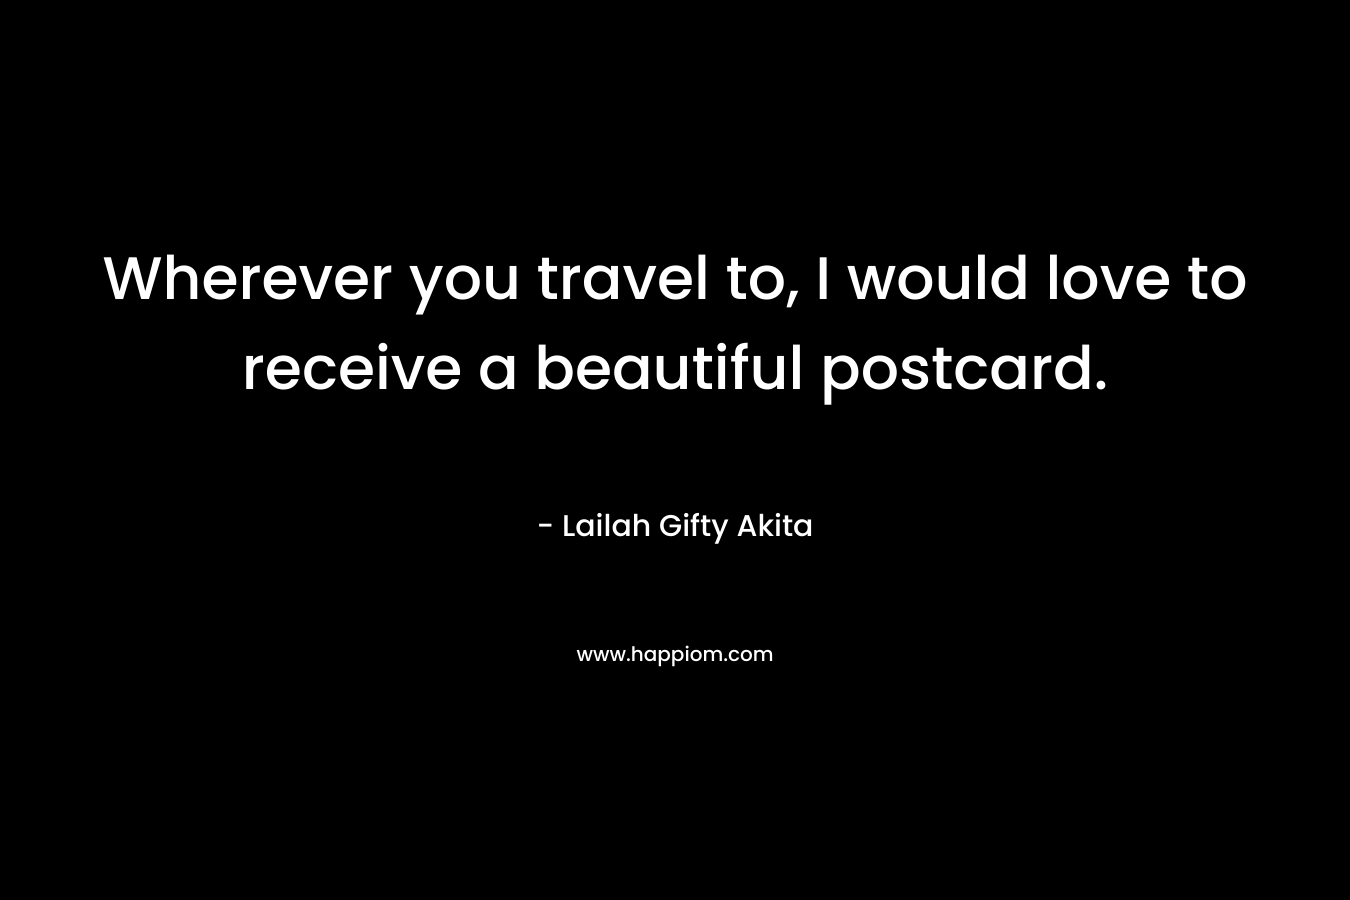 Wherever you travel to, I would love to receive a beautiful postcard.